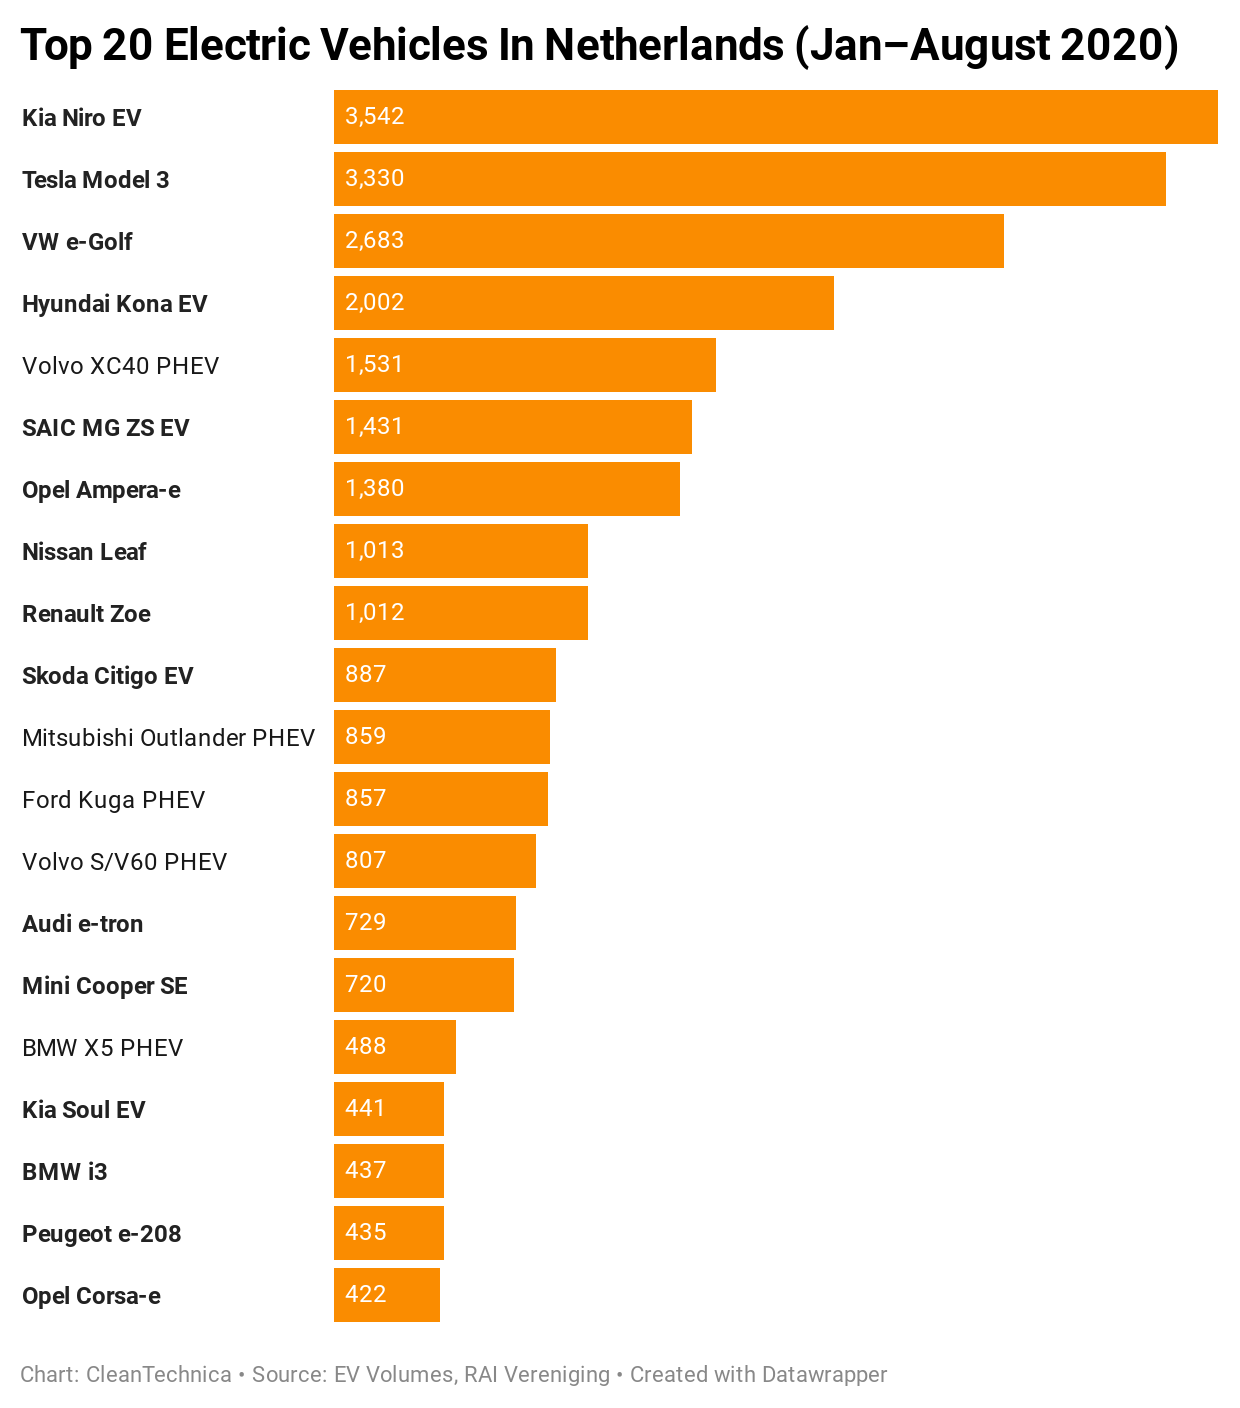 Top-20-Electric-Vehicles-in-Netherlands-January-August-2020-CleanTechnica.png